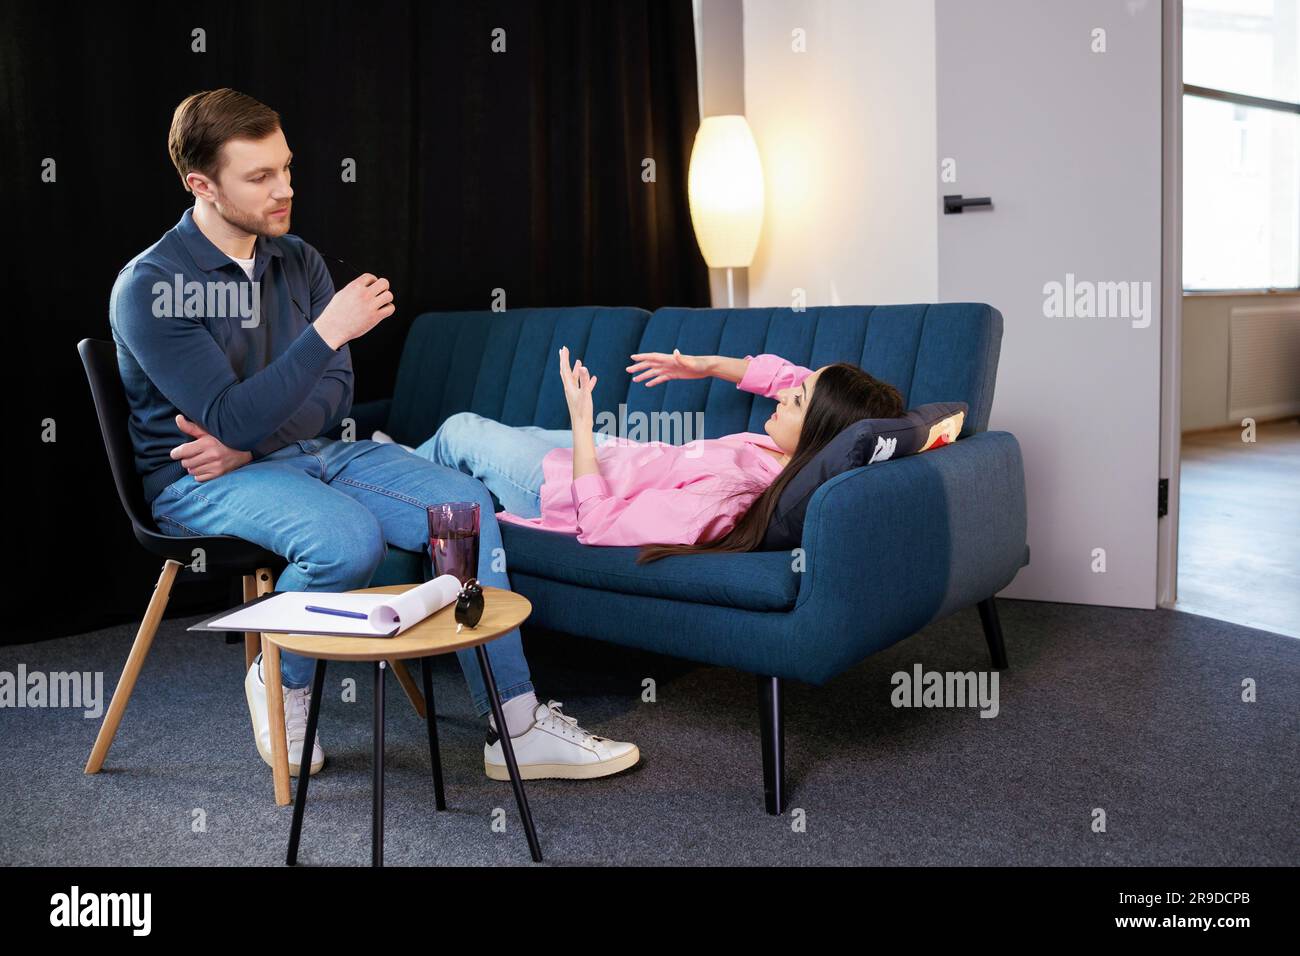 Attractive woman reclining comfortably on a couch talking to his psychiatrist explaining something. Stock Photo